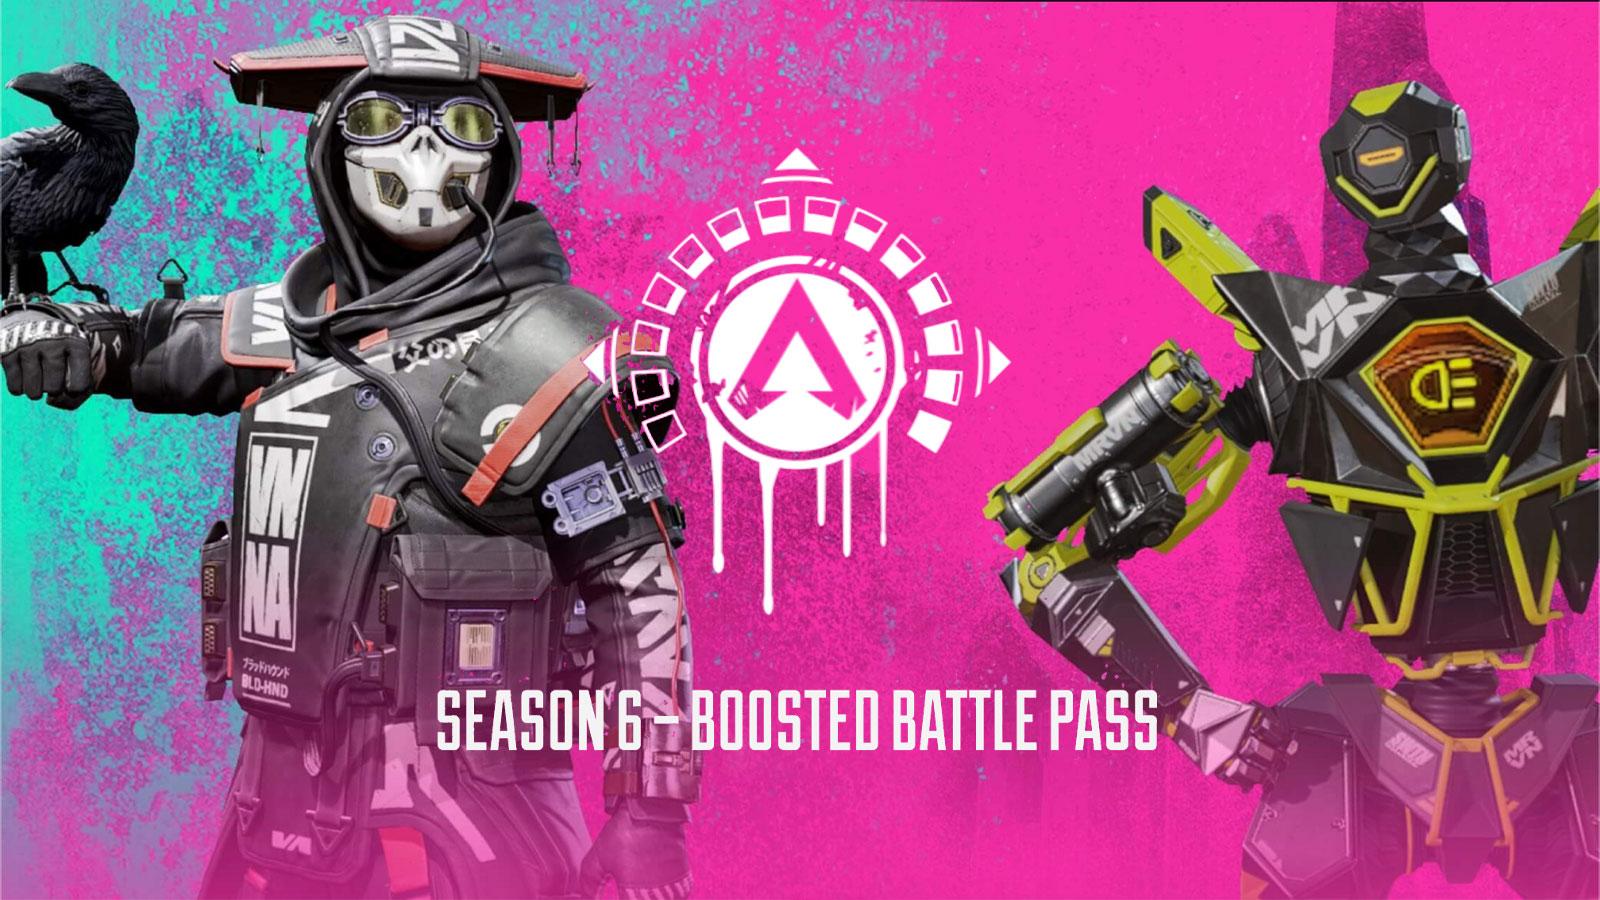 Apex Legends Mobile has its own EXCLUSIVE battlepass and new skins